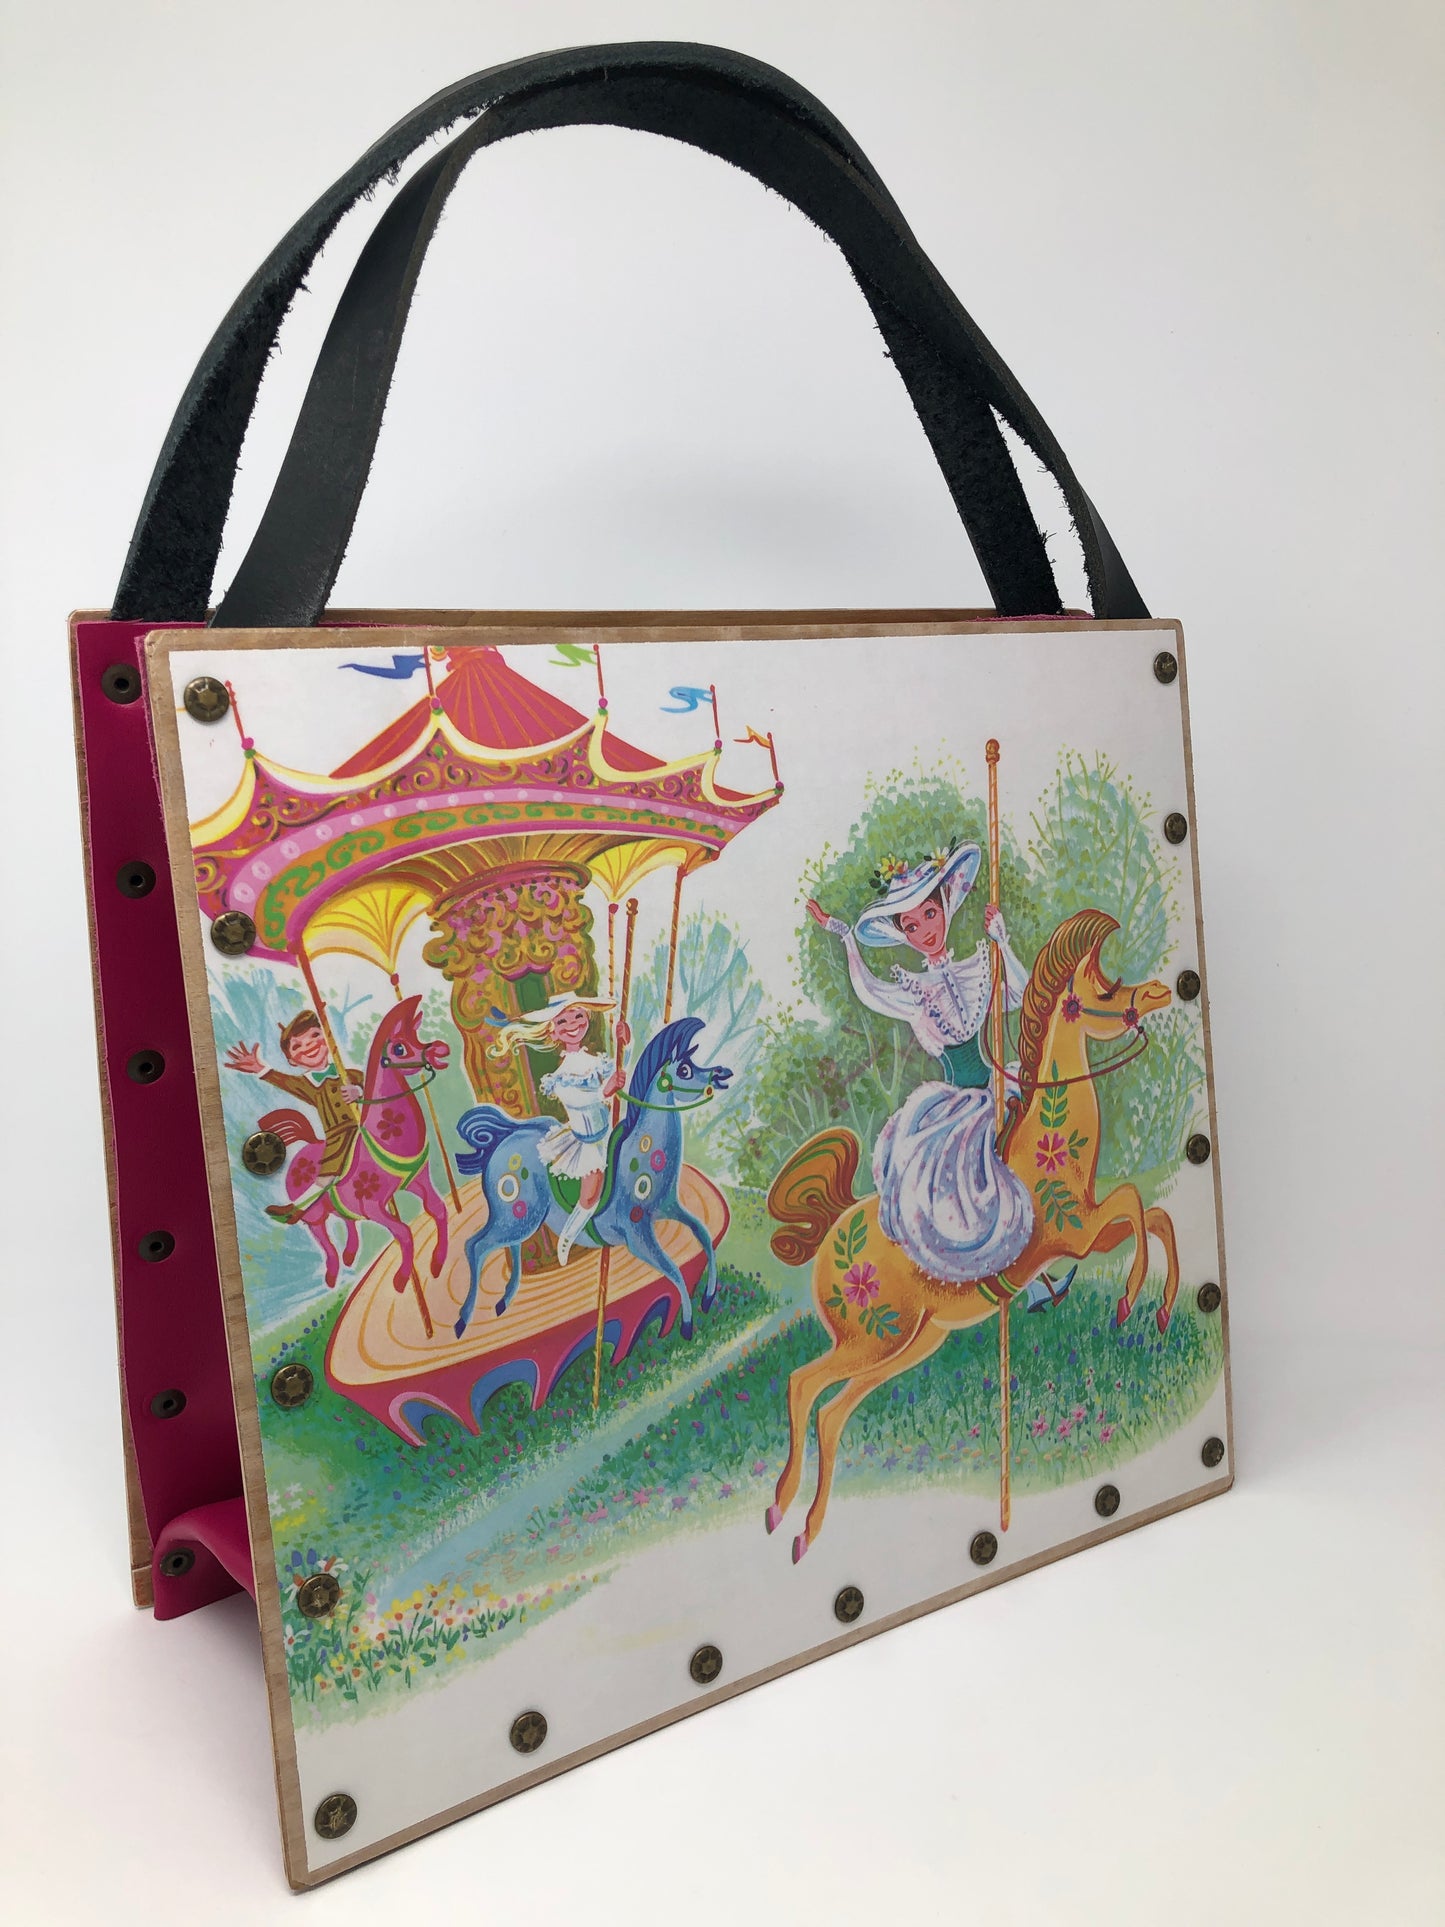 Vintage Graphics Tote Bag - Disney themed Mary Poppins